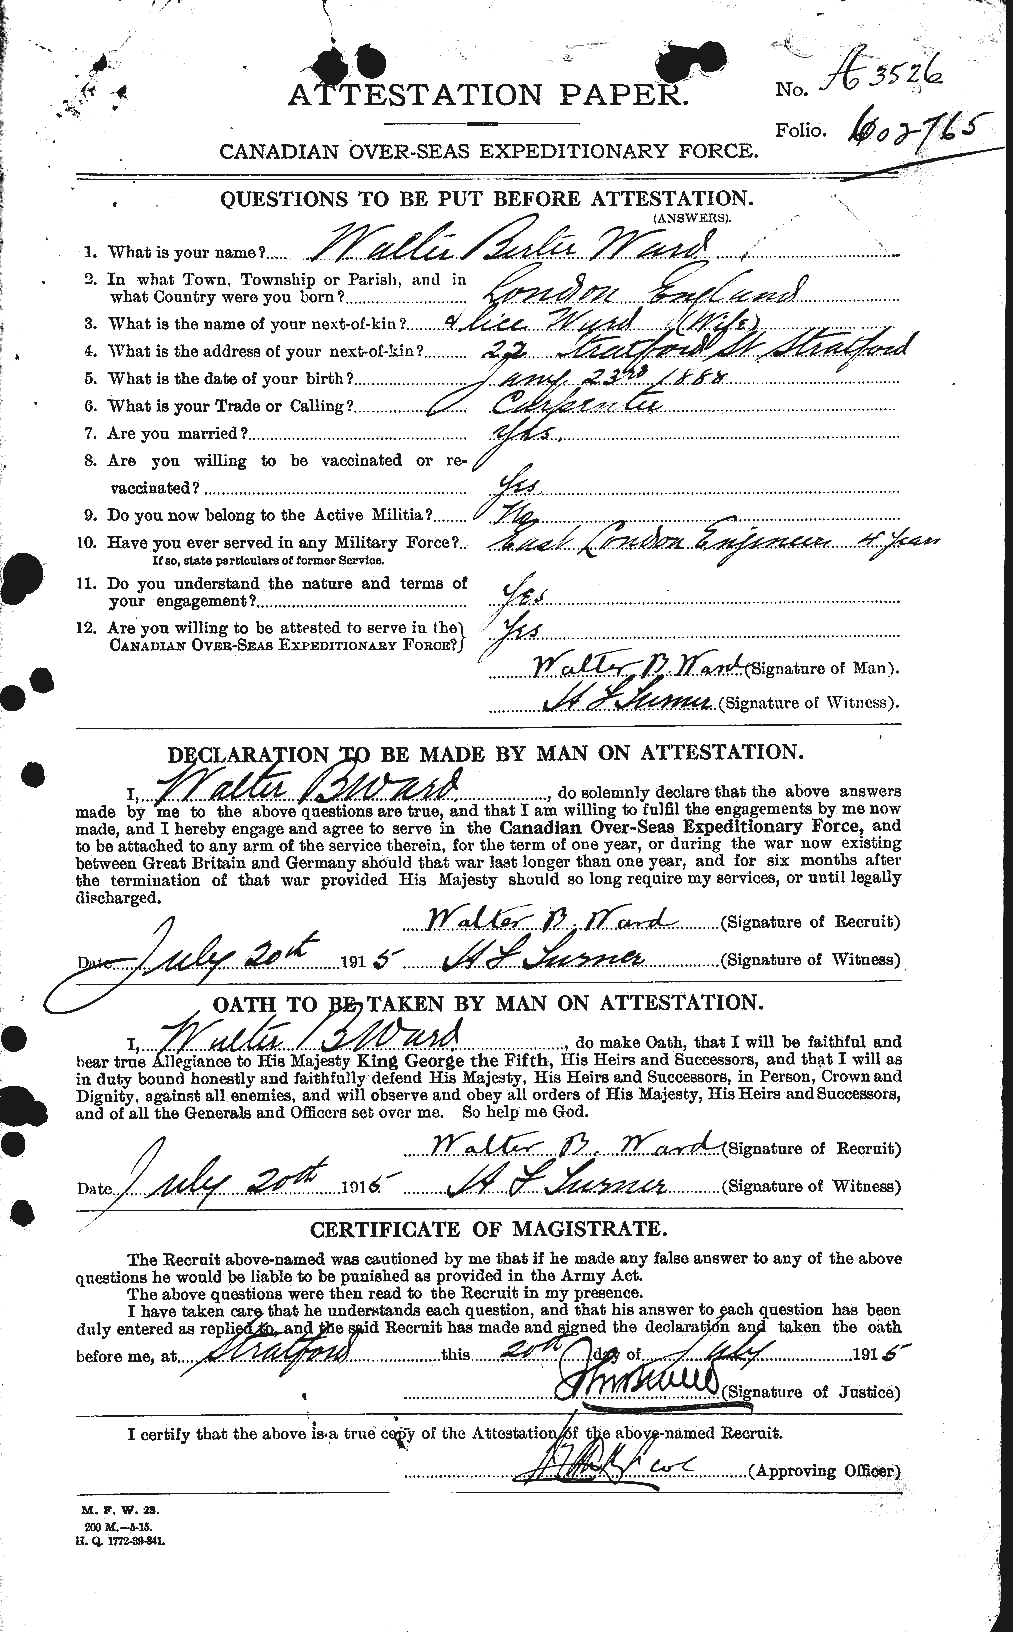 Personnel Records of the First World War - CEF 659755a